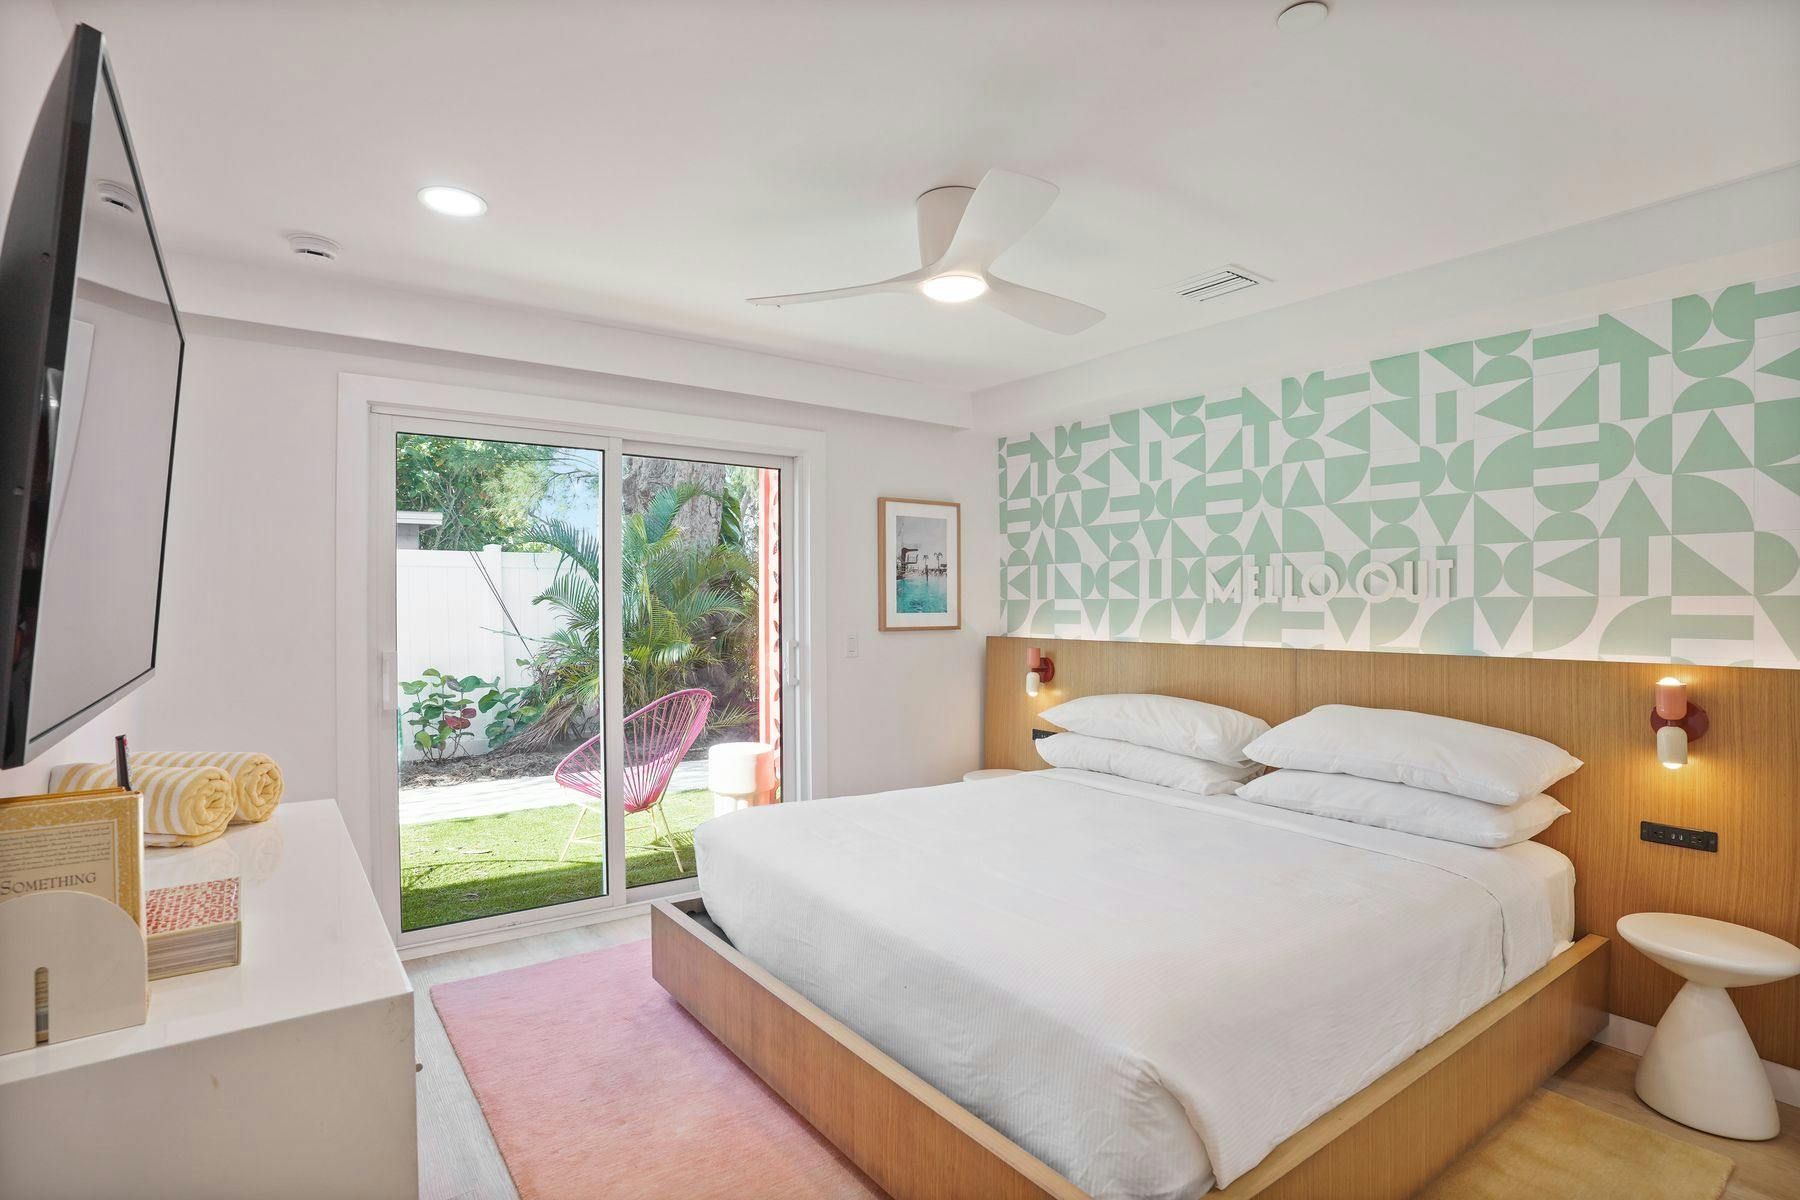 Modern primary bedroom at an Anna Maria Island vacation rental.